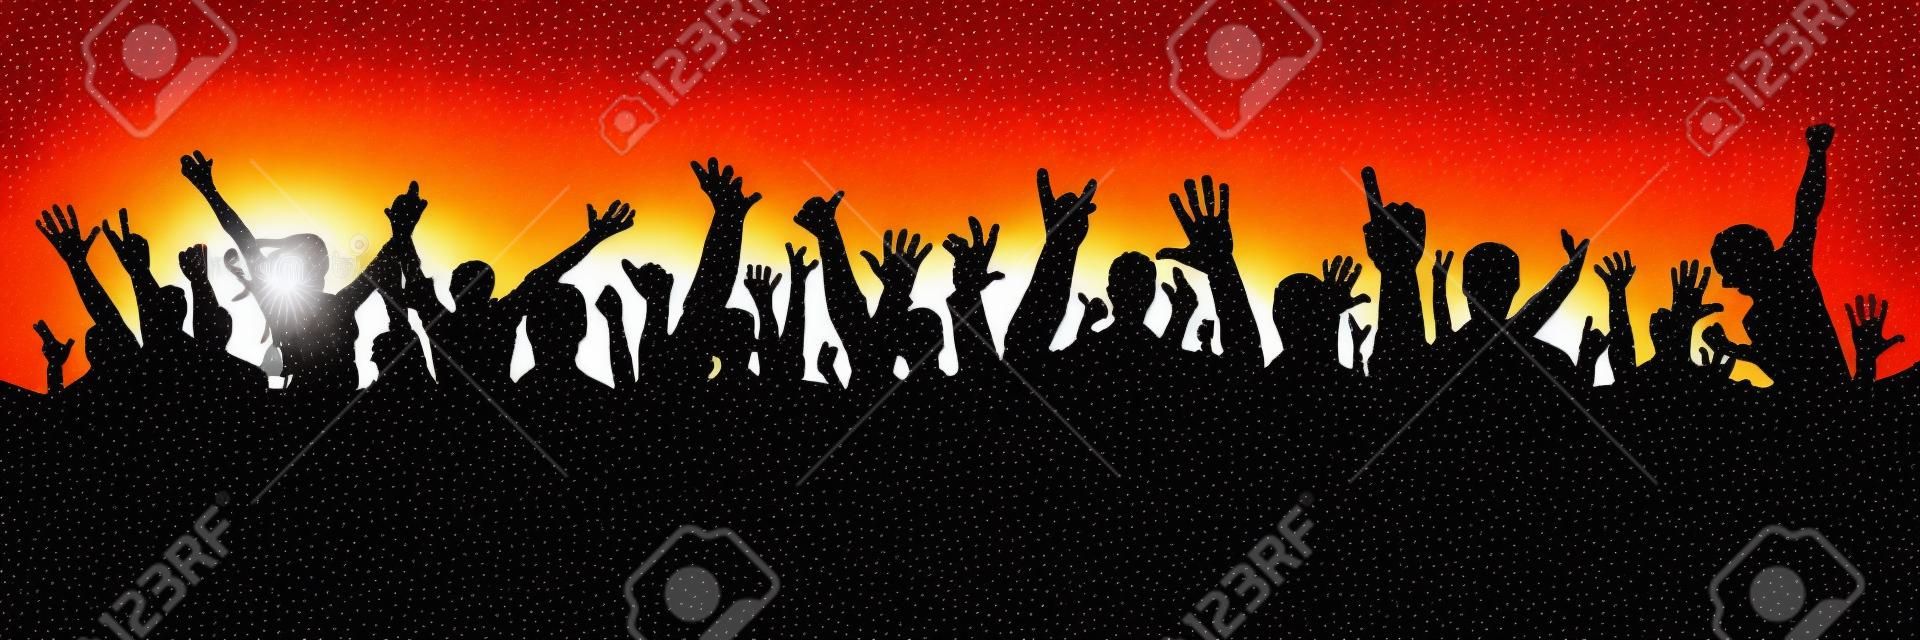 Hand crowd silhouette Vector illustration.